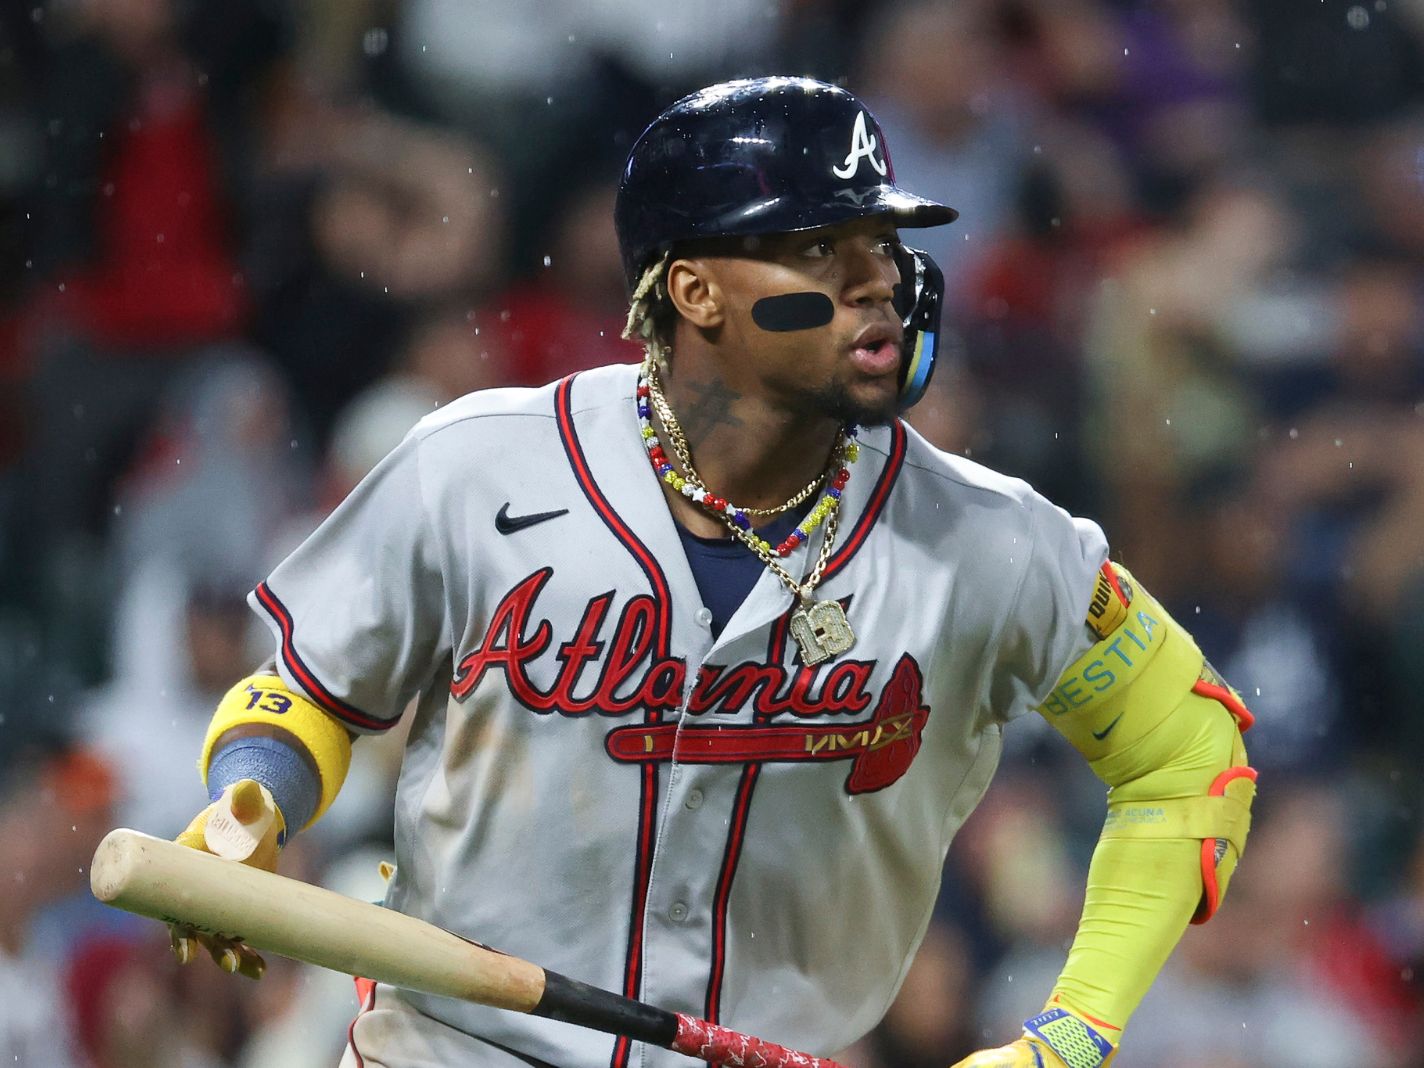 Multiple Fans Rush Field and Make Contact With Braves' Ronald